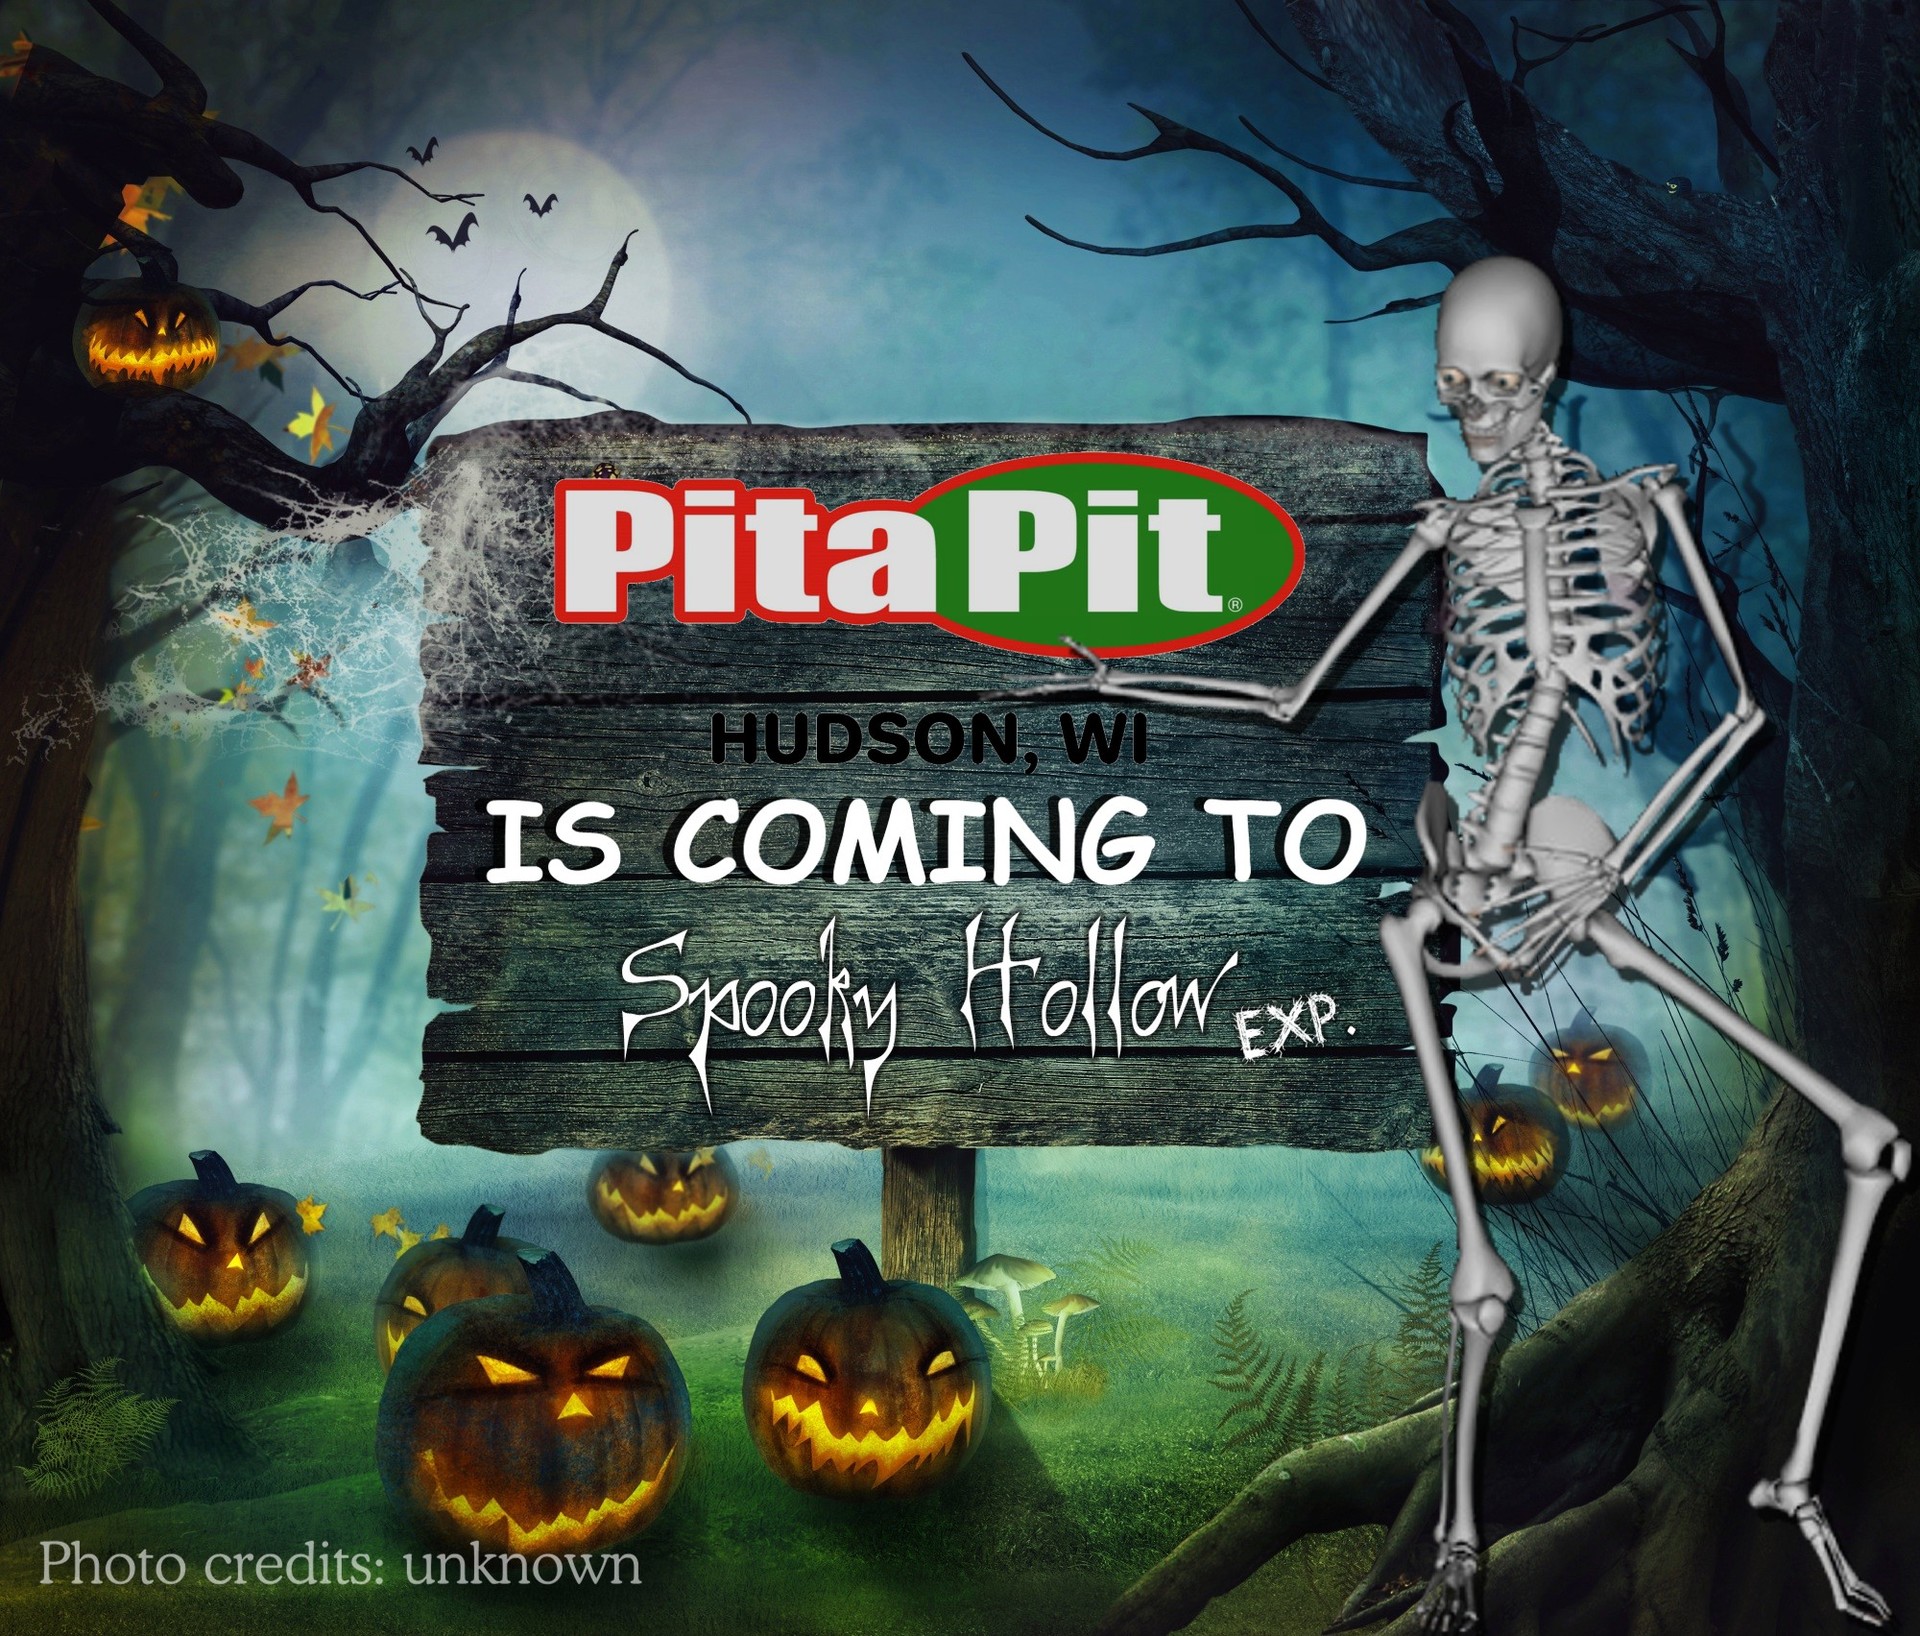 Spooky Hollow Experience Pita Pit